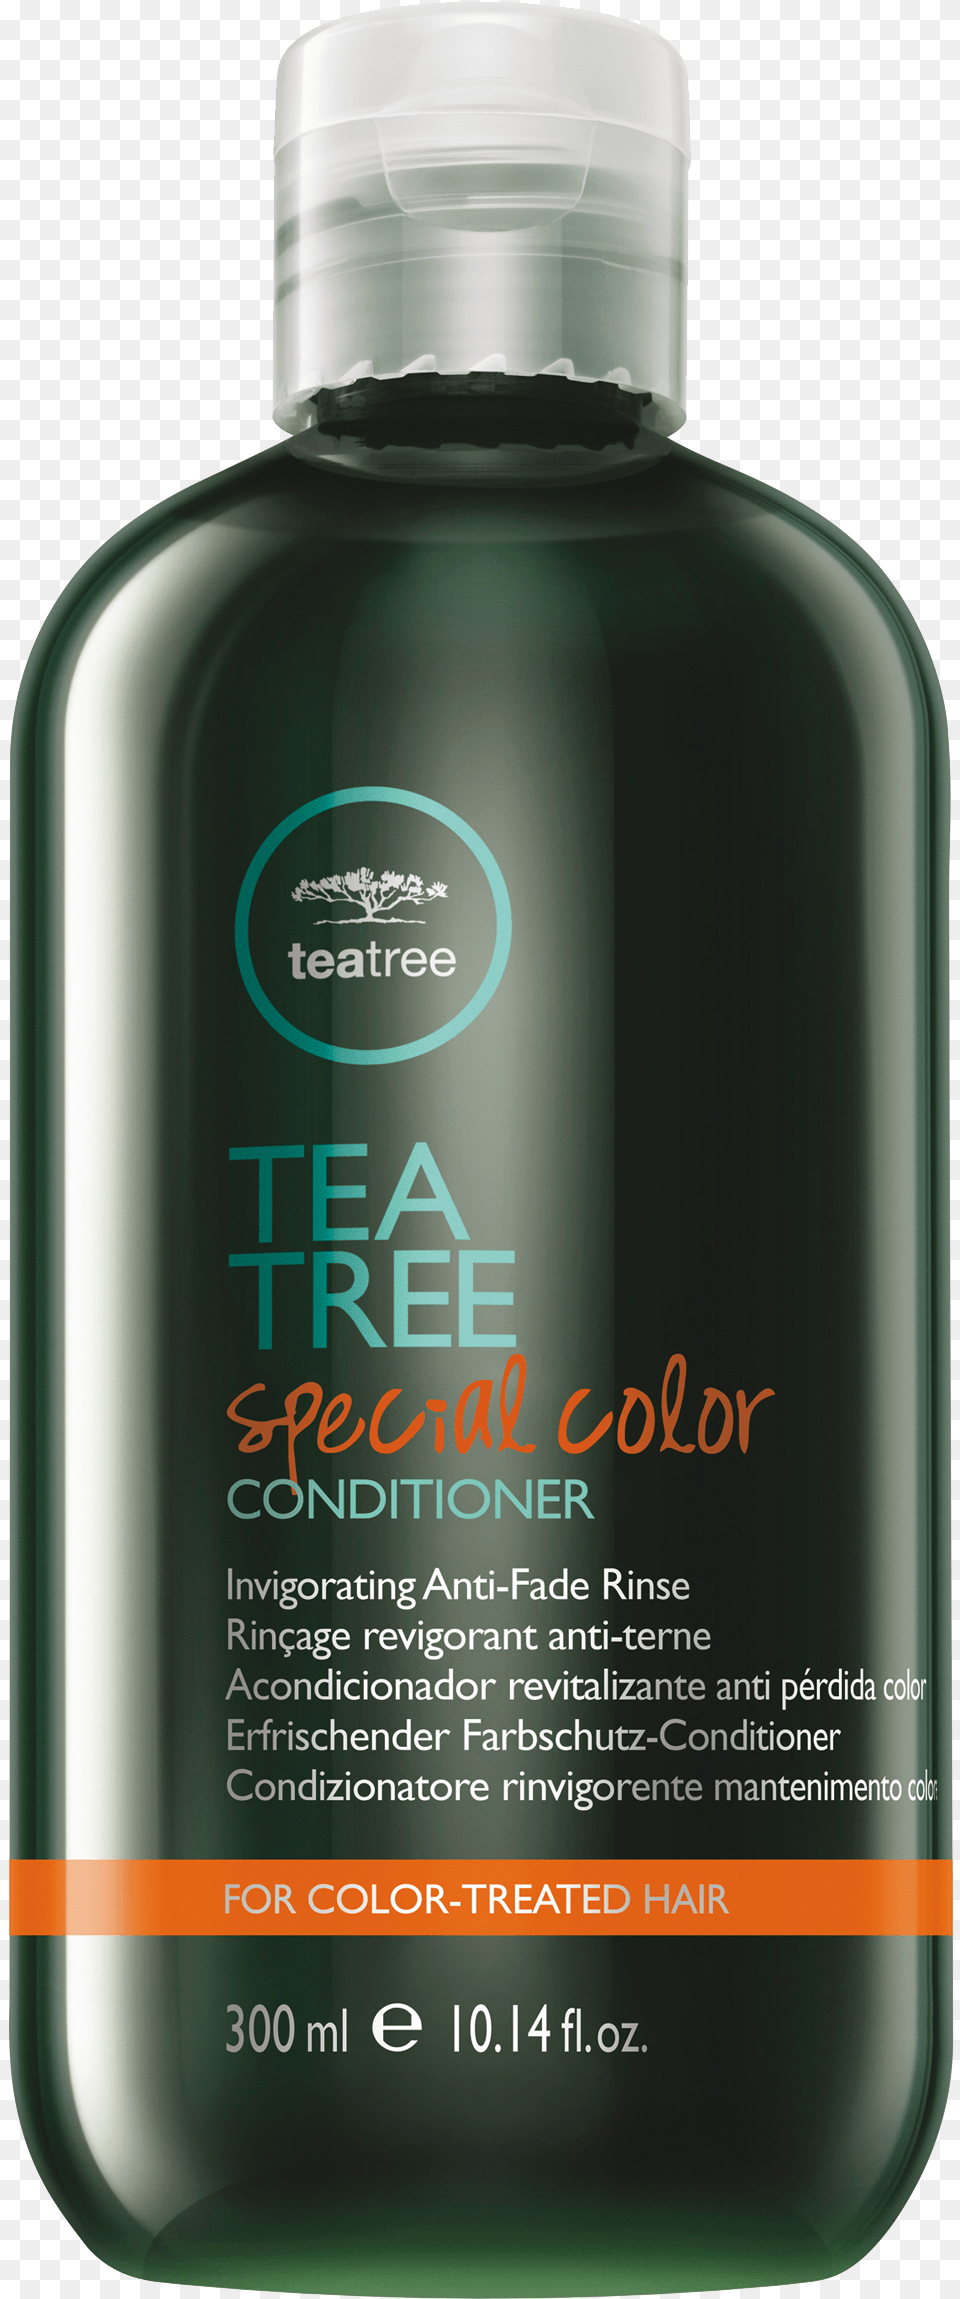 Paul Mitchell Tea Tree Special Color Conditioner Tea Tree Special Color, Bottle, Cosmetics, Perfume Free Png